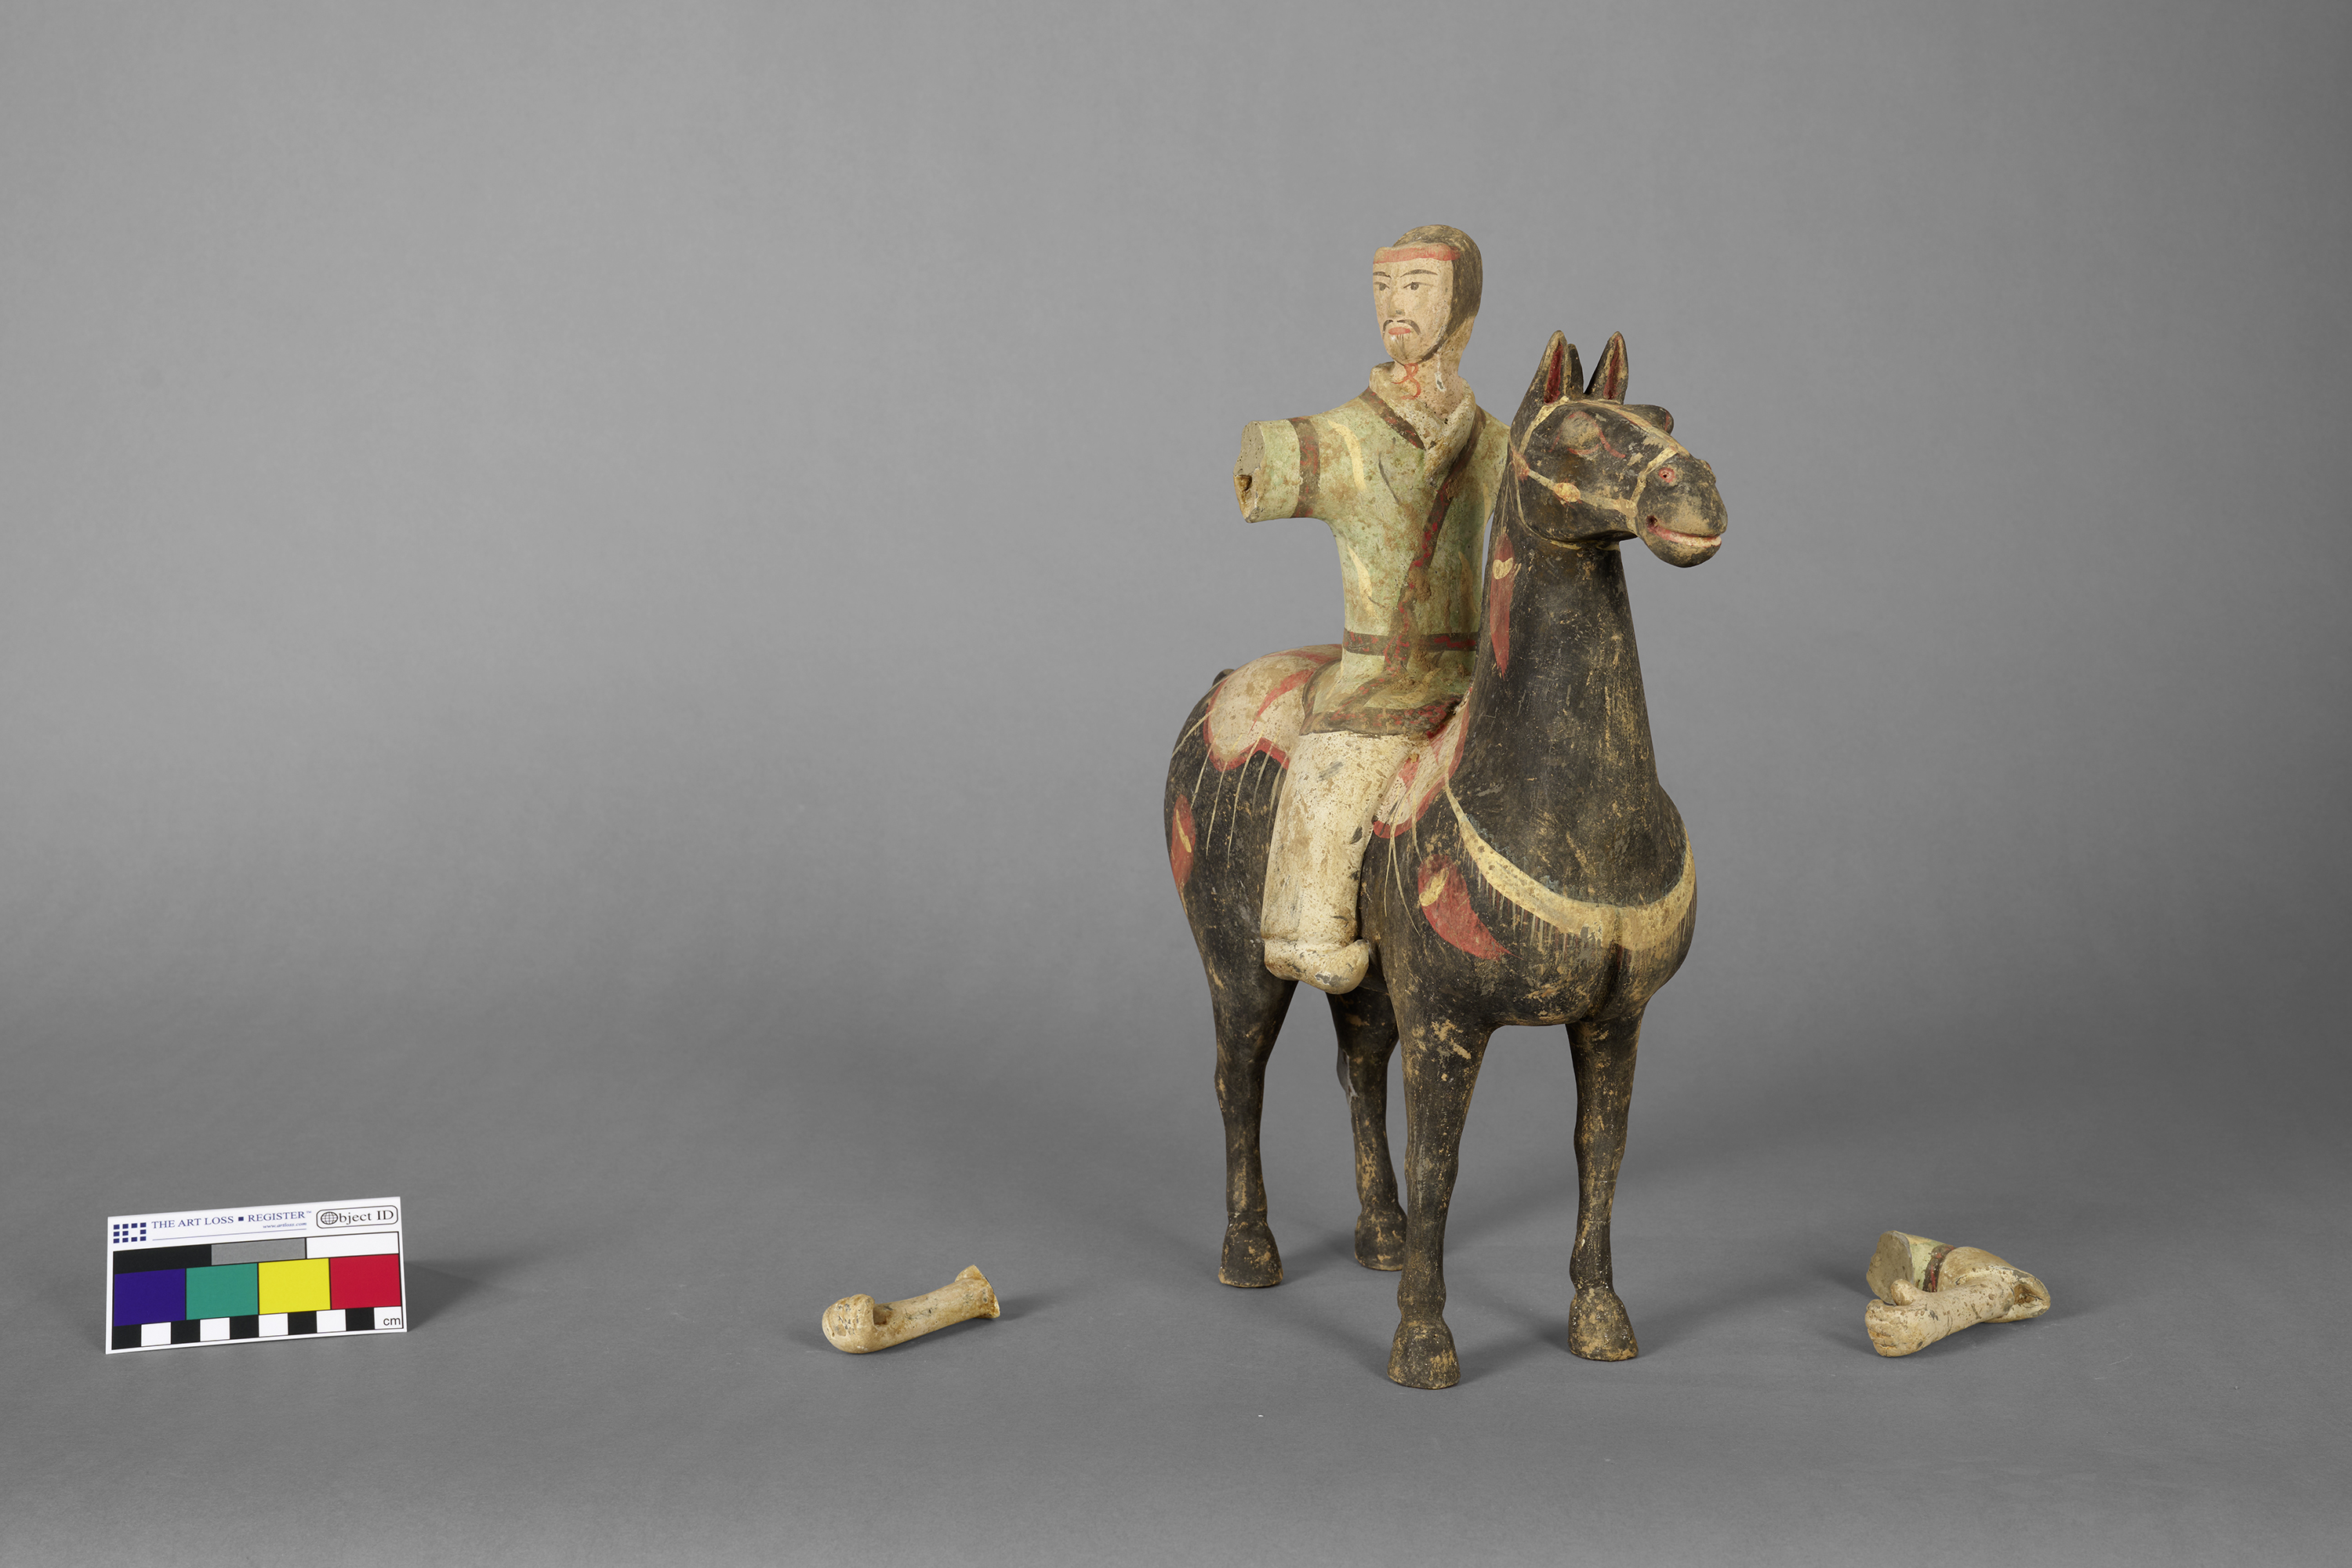 Equestrian statue with horse from the Han Dynasty. Photo: Flurin Bertschinger, NL